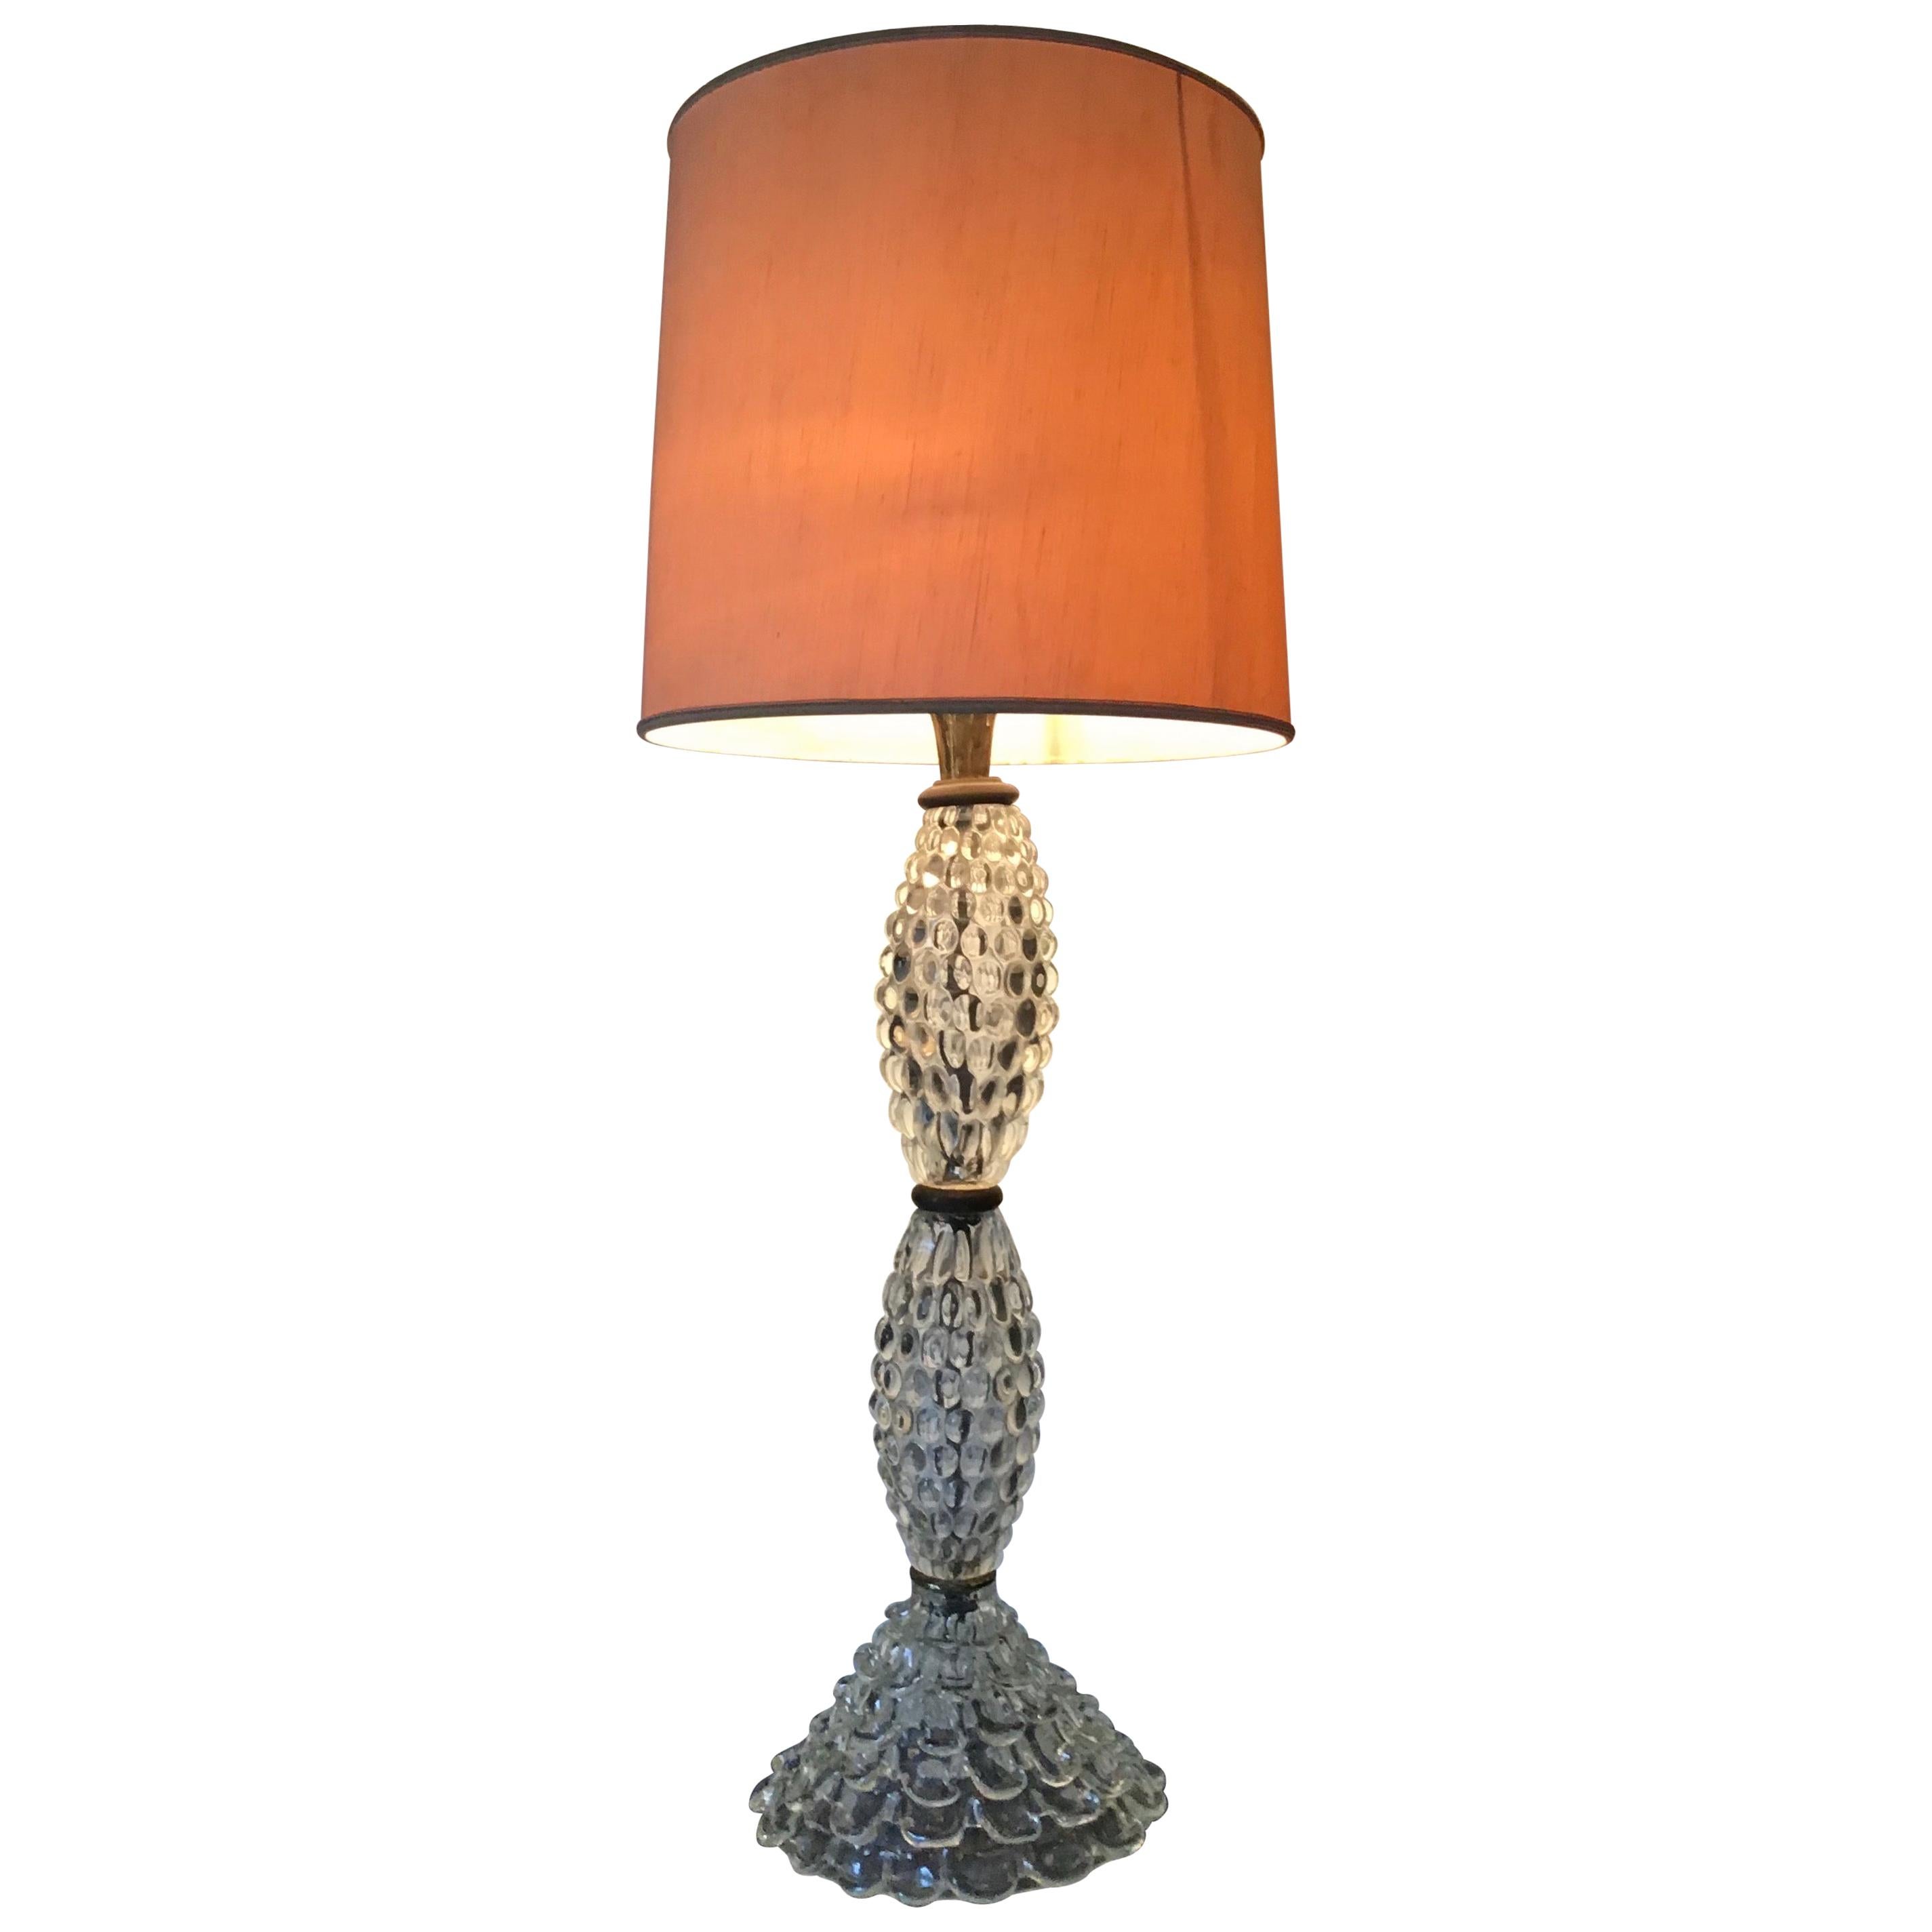 Barovier & Toso Table Lamp Murano Glass Brass Fabric Lampshade, 1940, Italy For Sale